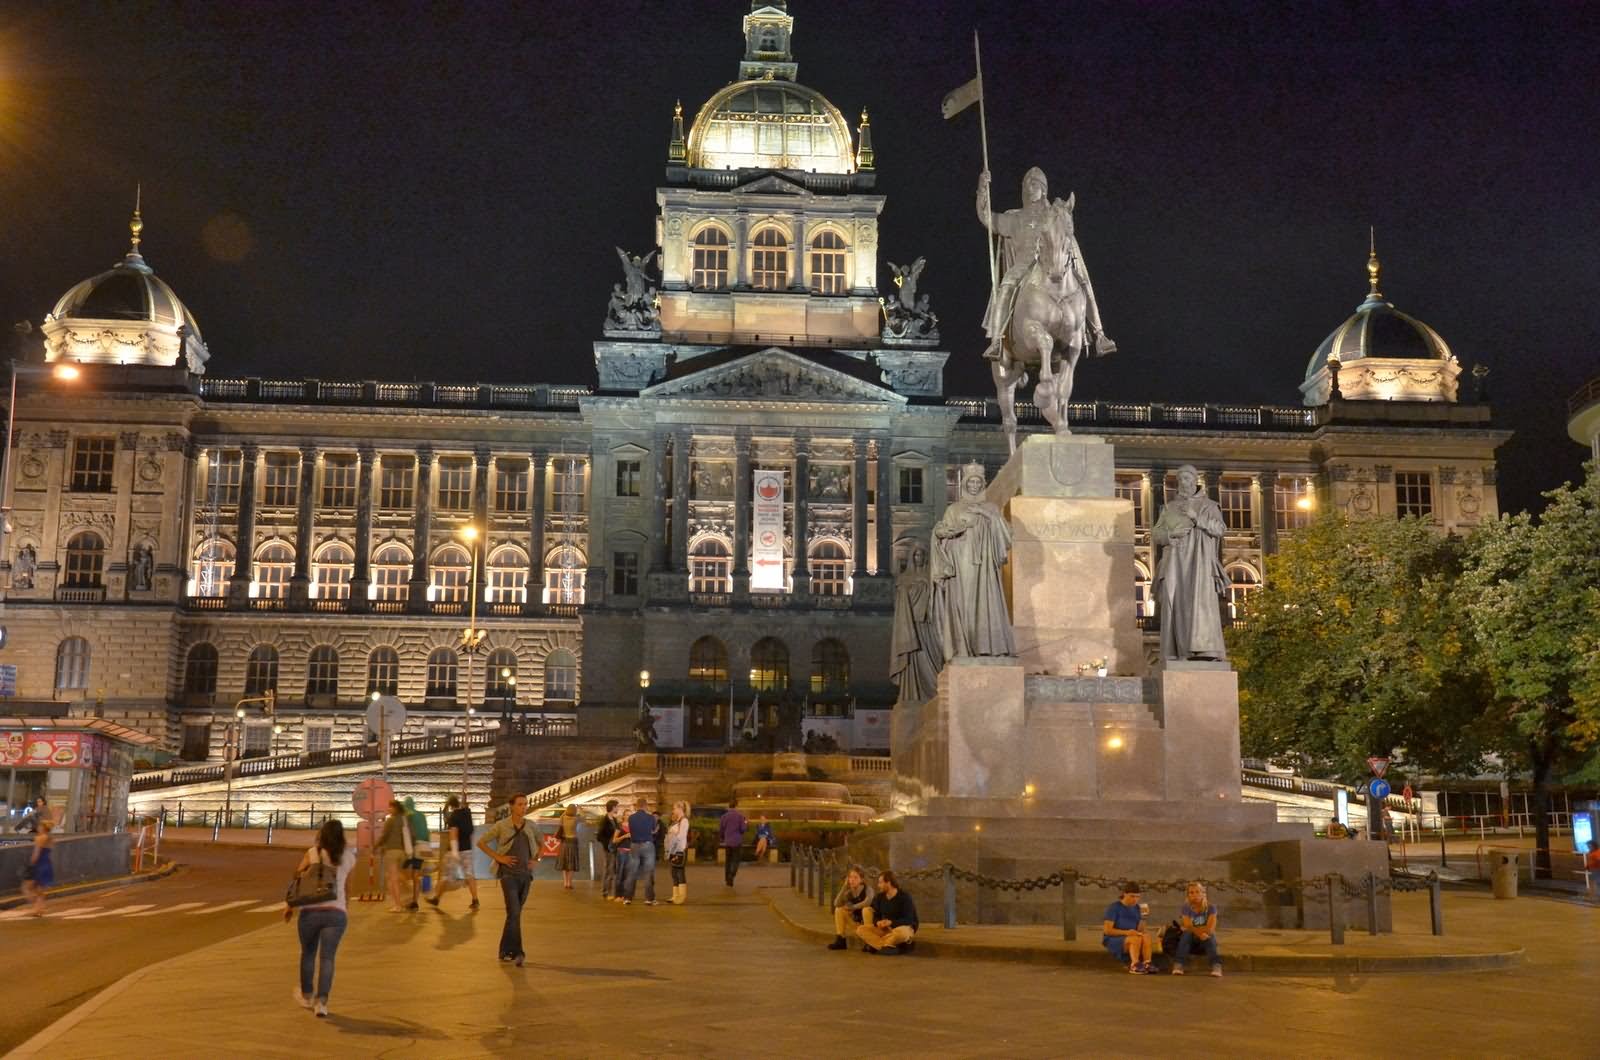 From The South Eastern End Of Wenceslas Square At Night